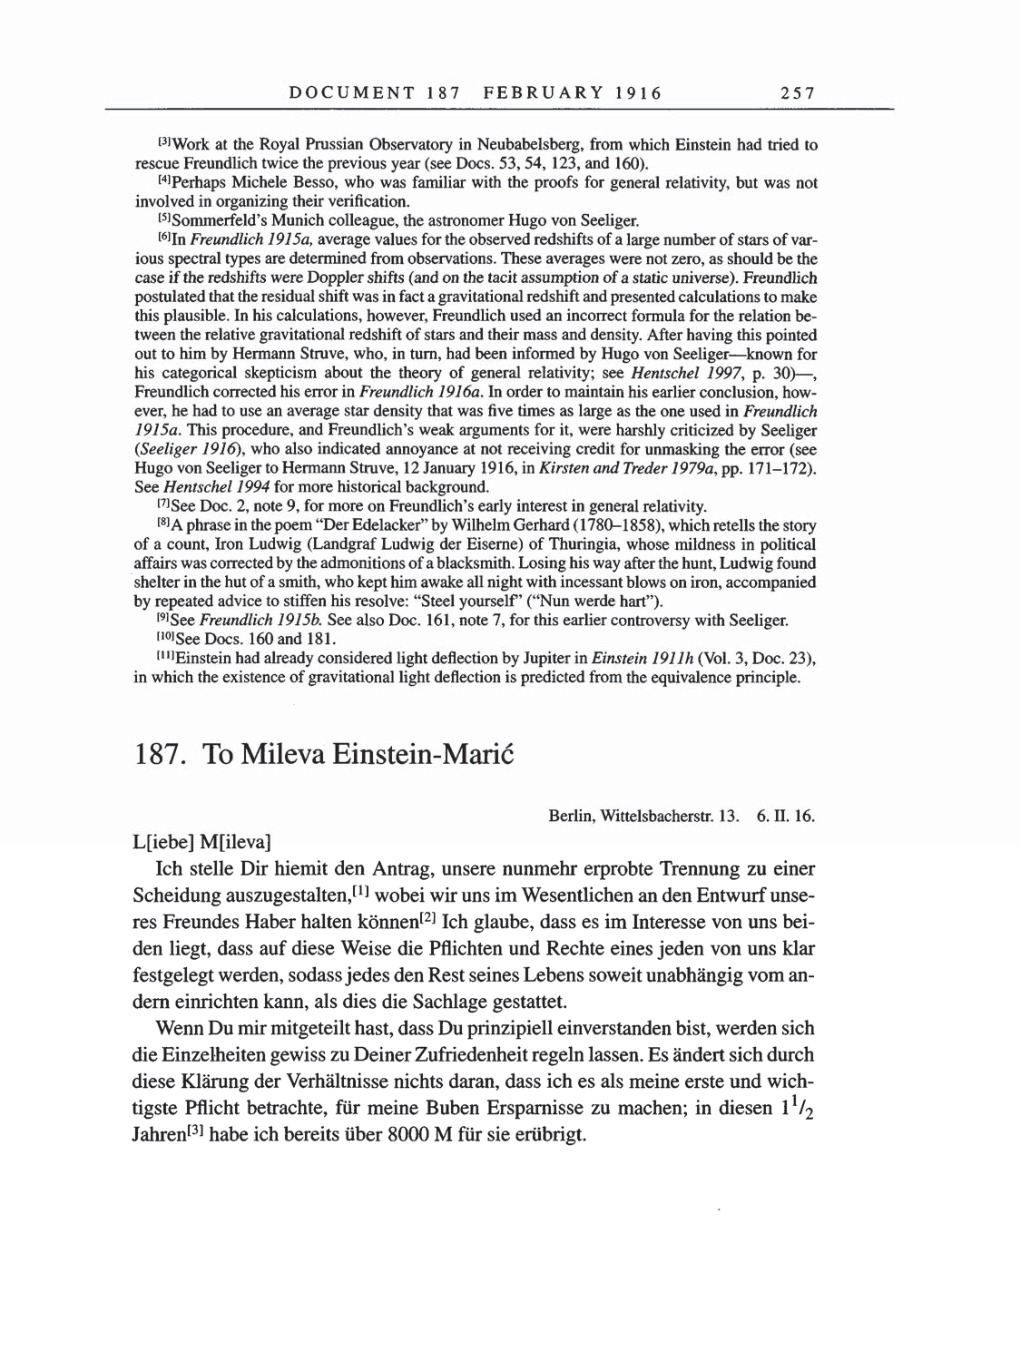 Volume 8, Part A: The Berlin Years: Correspondence 1914-1917 page 257